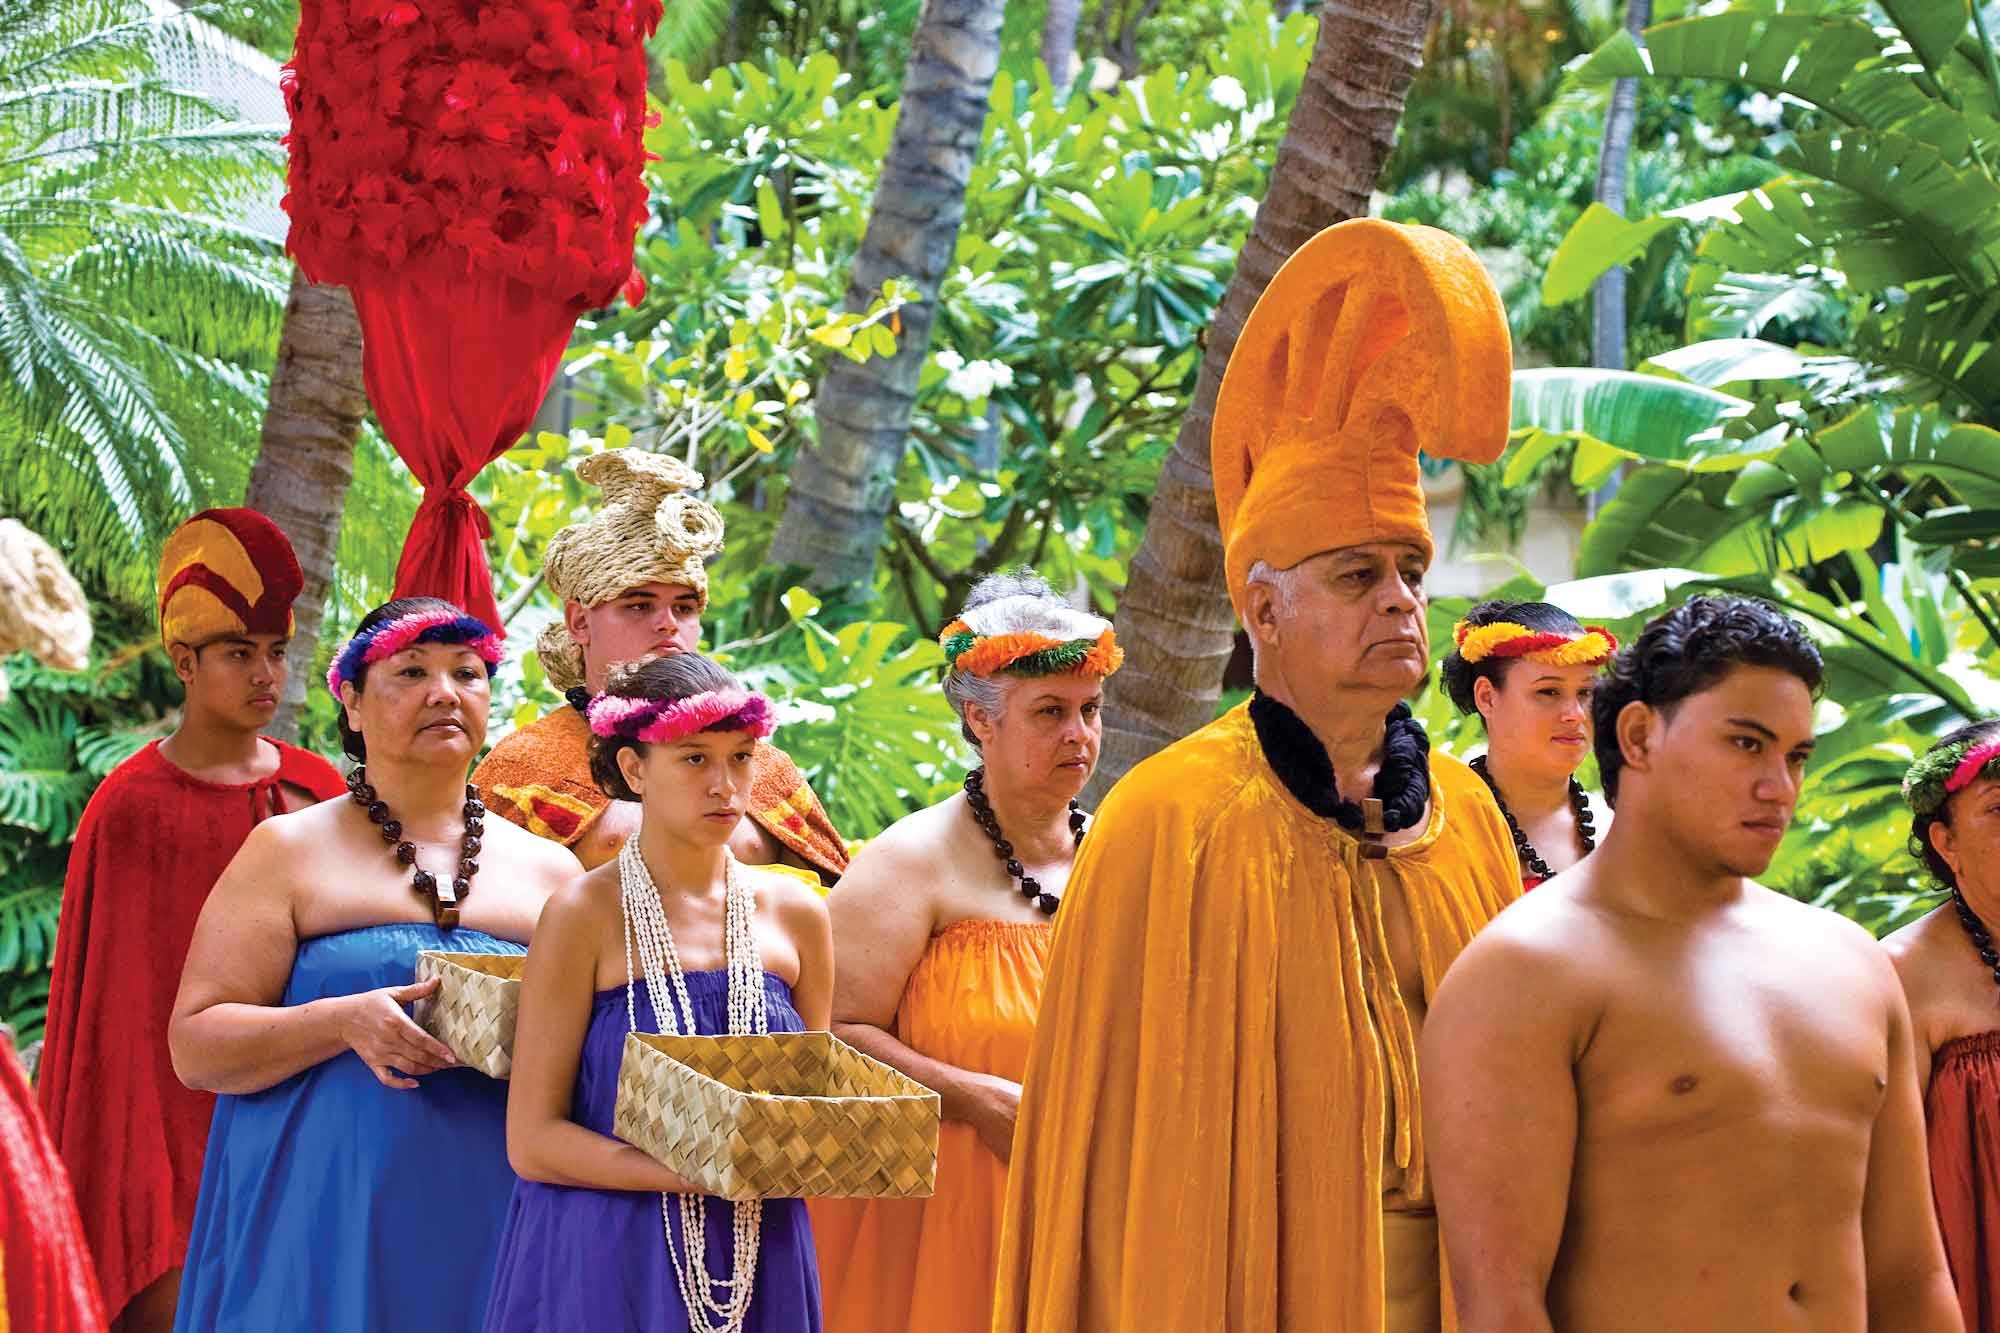 Aloha Festivals 2013: Annual September events highlight Hawaiian culture |  Article | The United States Army